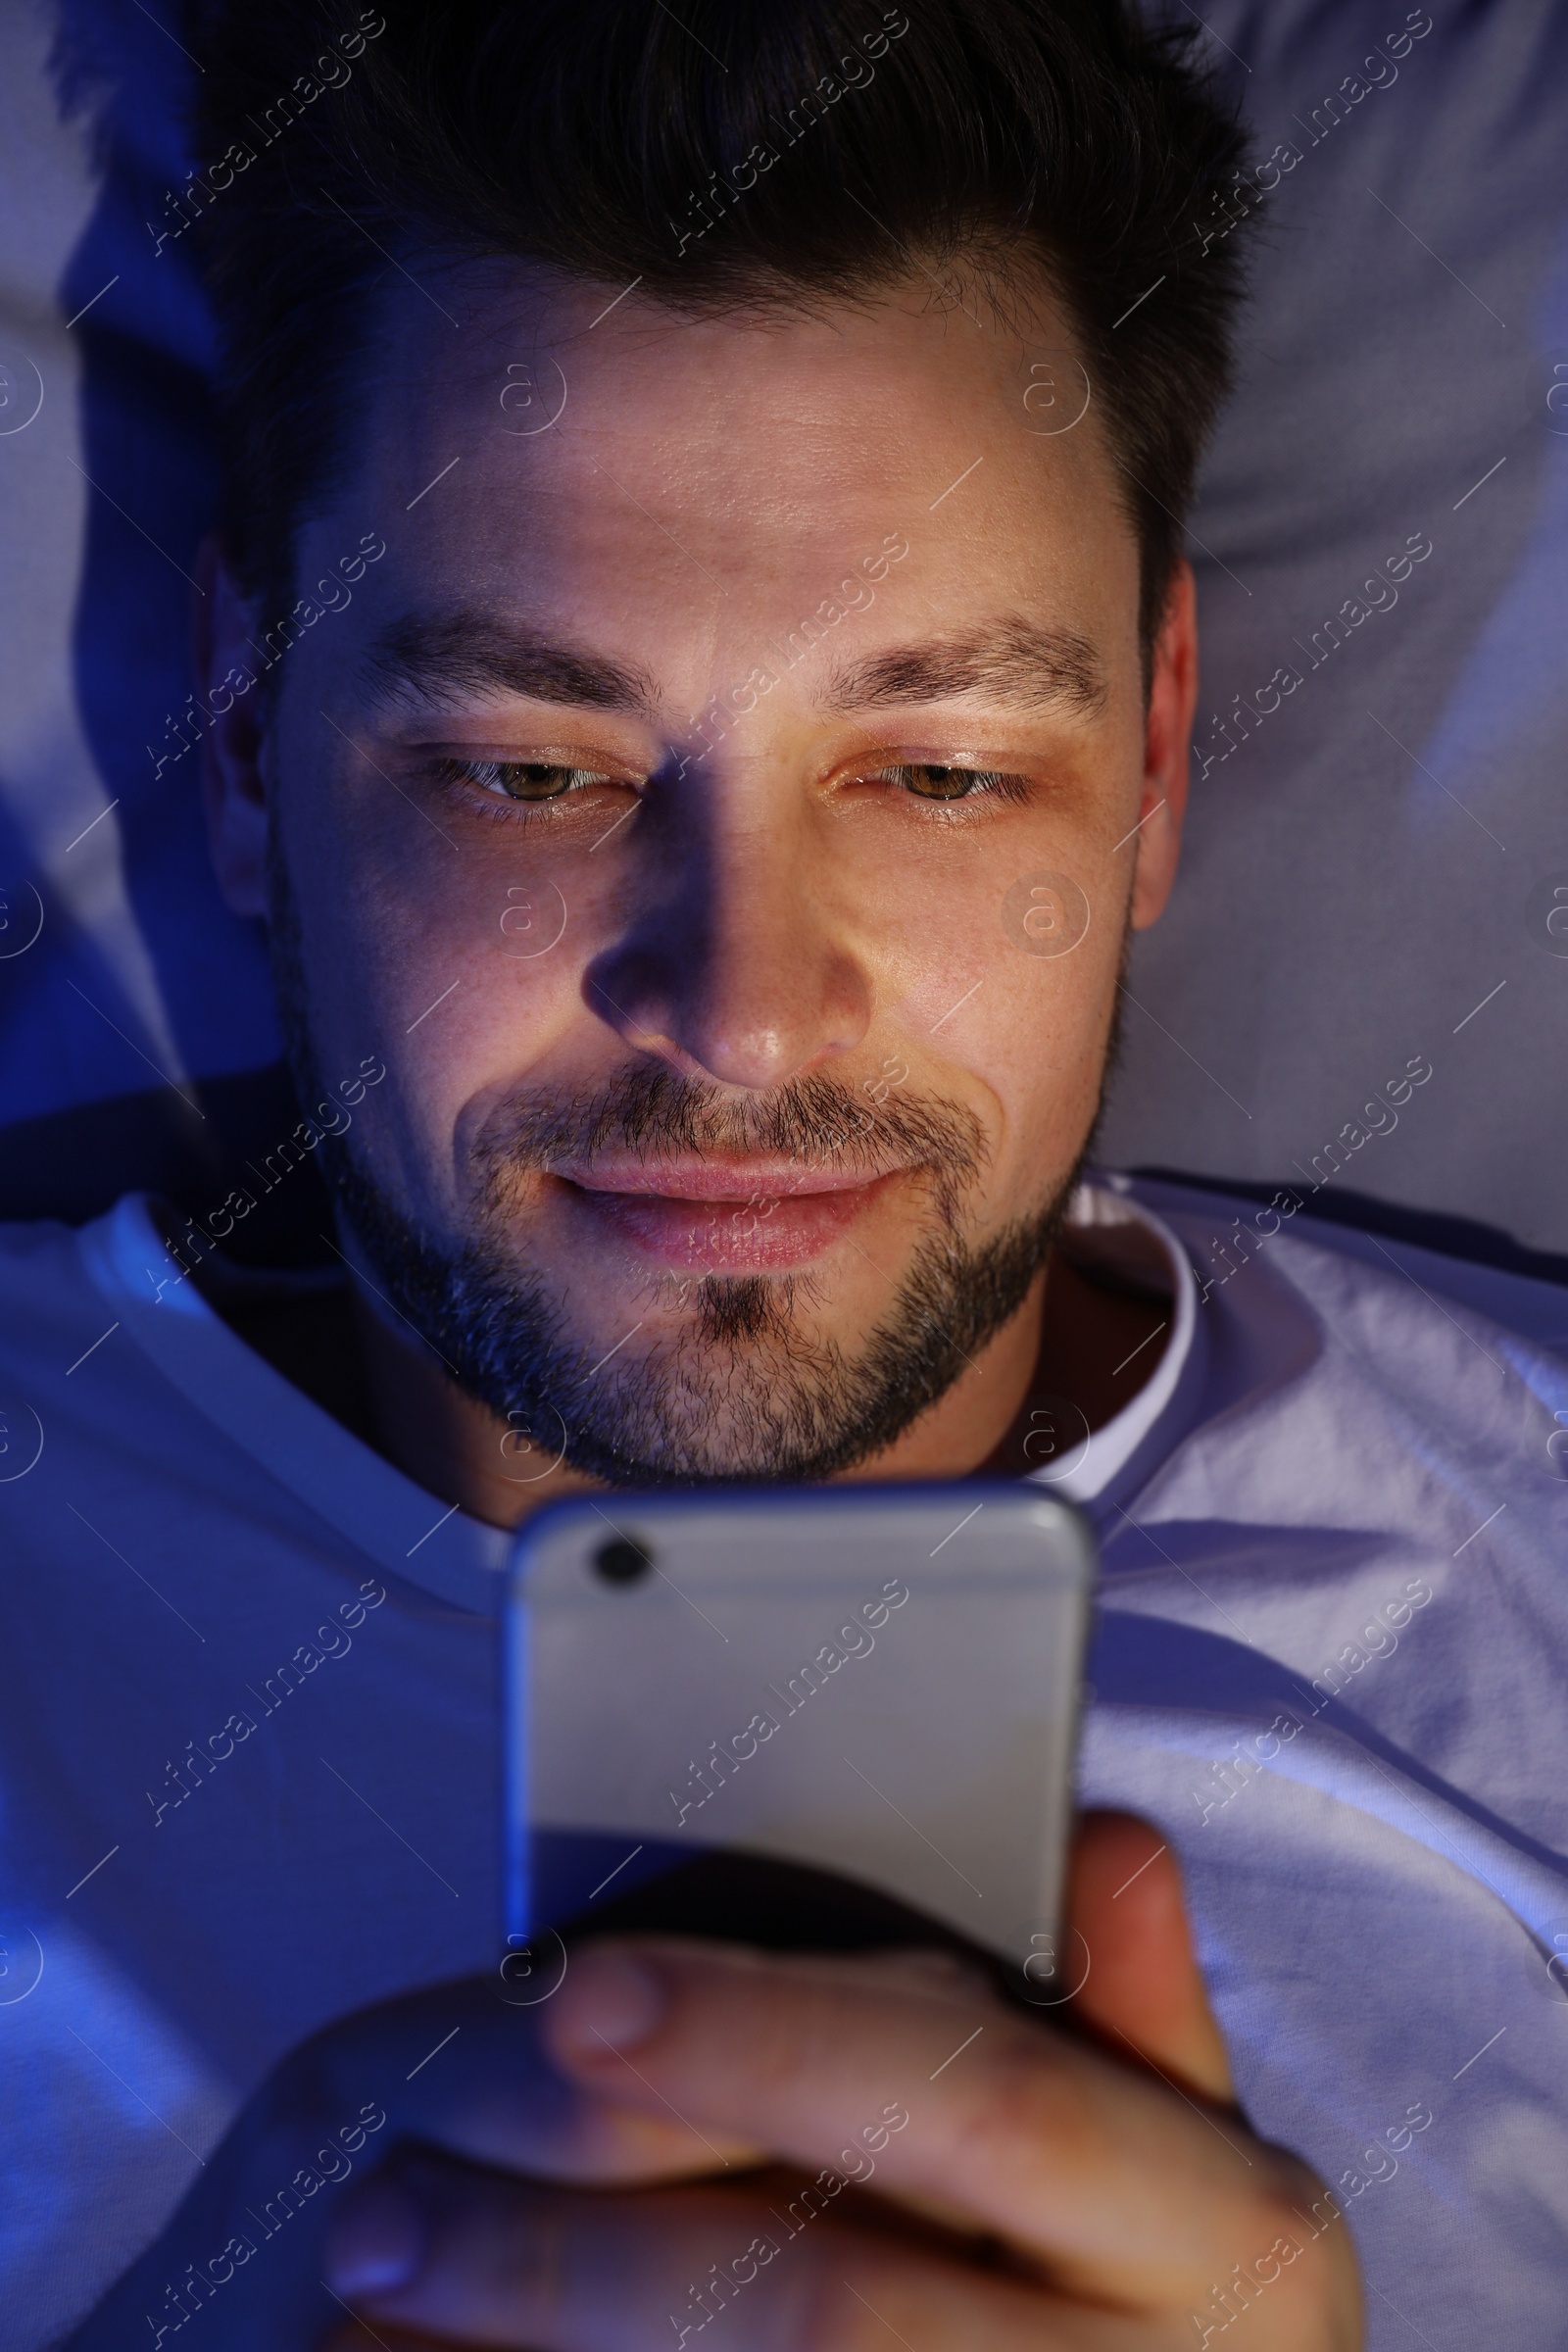 Photo of Handsome man using smartphone at night, view from above. Bedtime